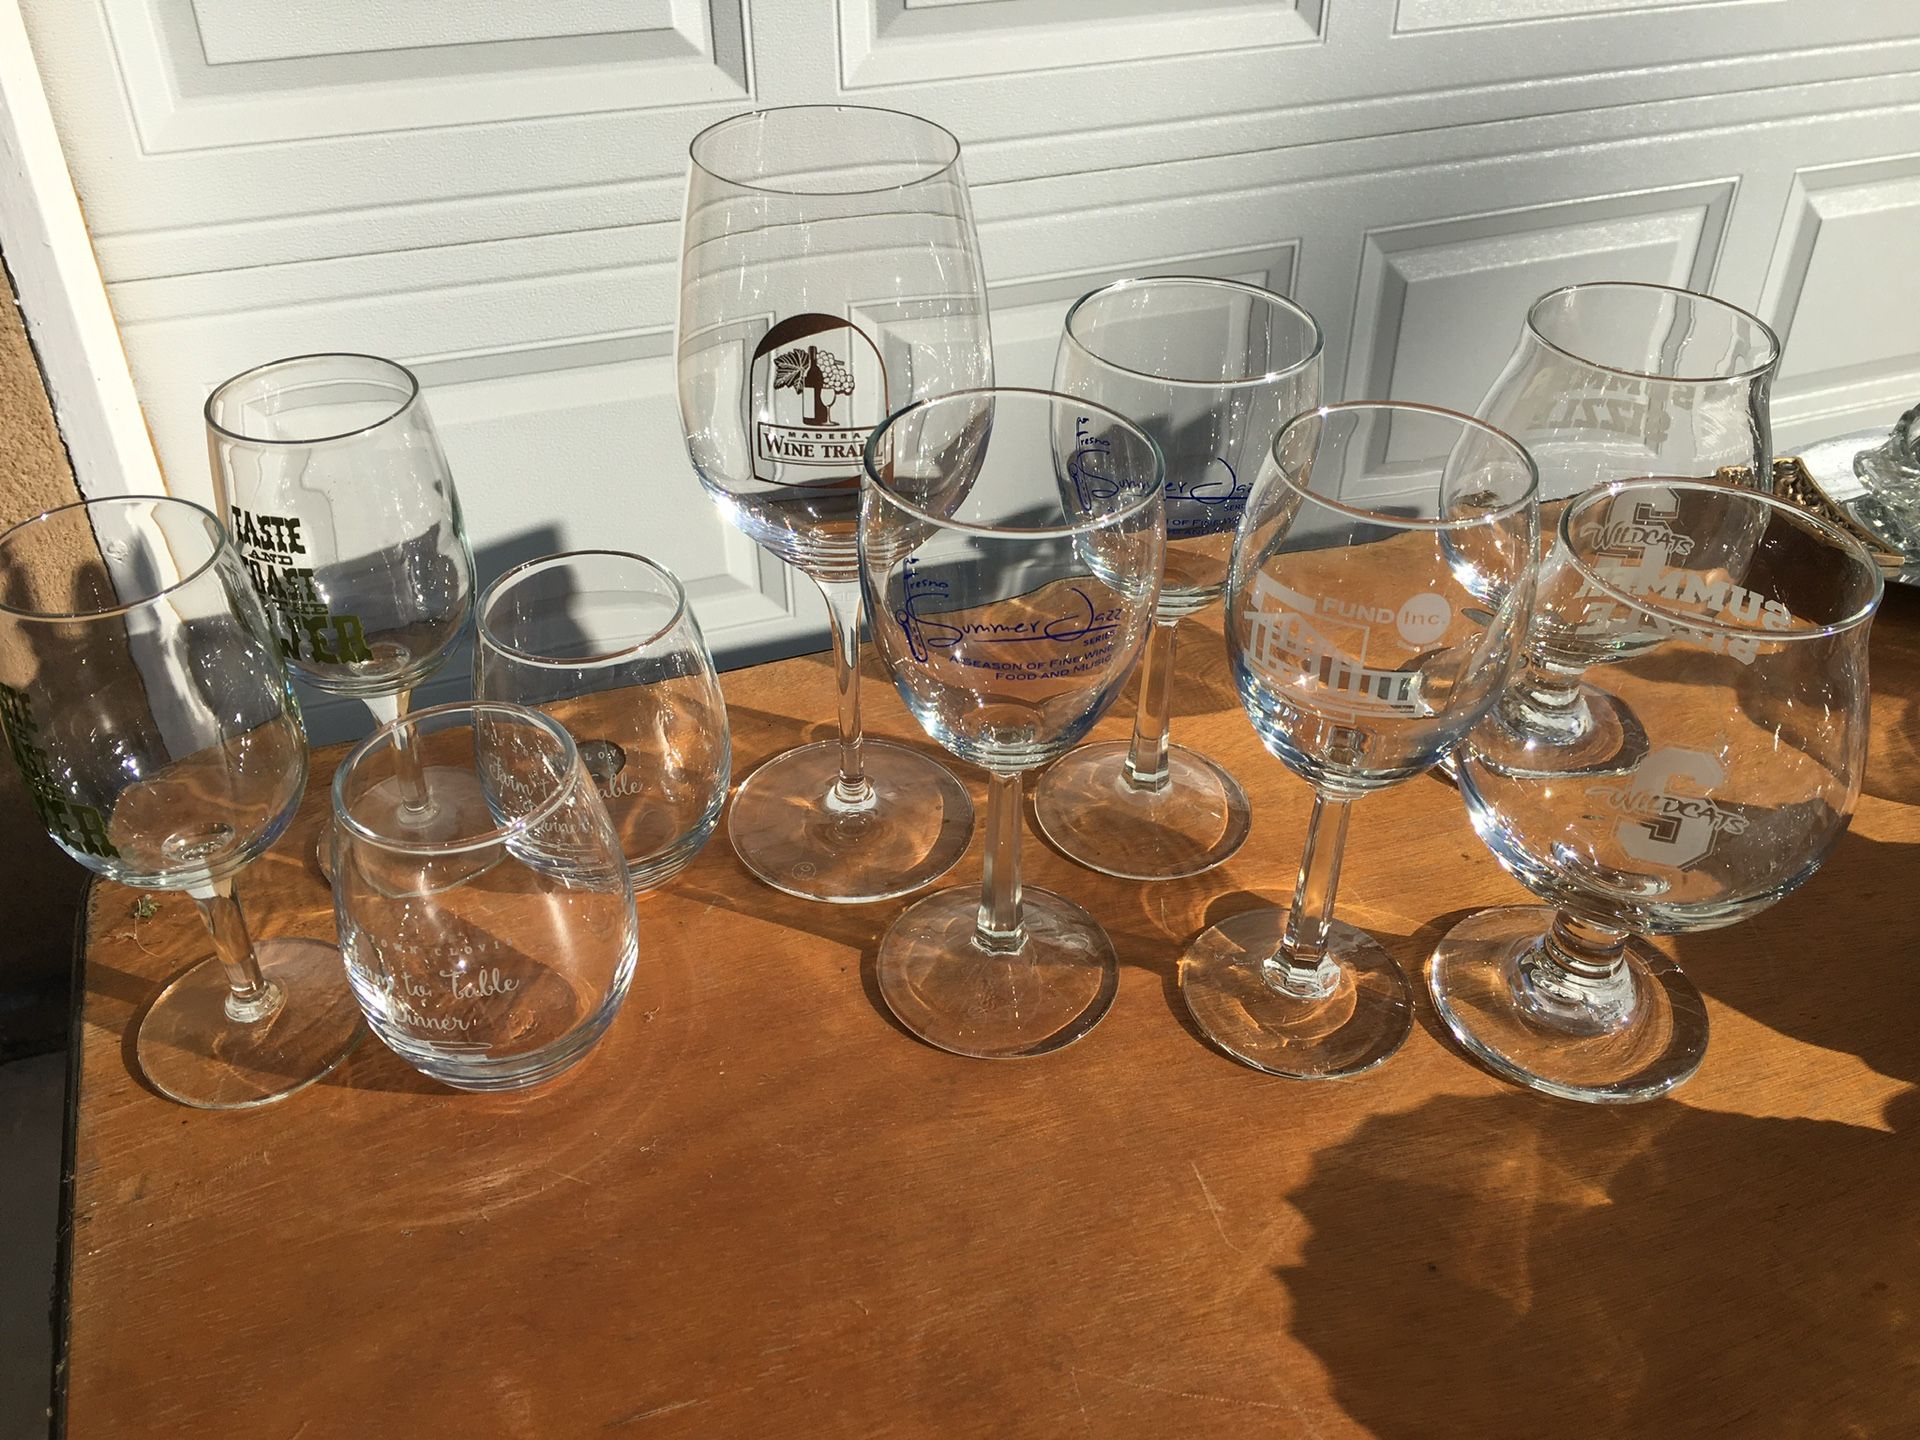 10 wine tasting glasses from wine tasting events all$10